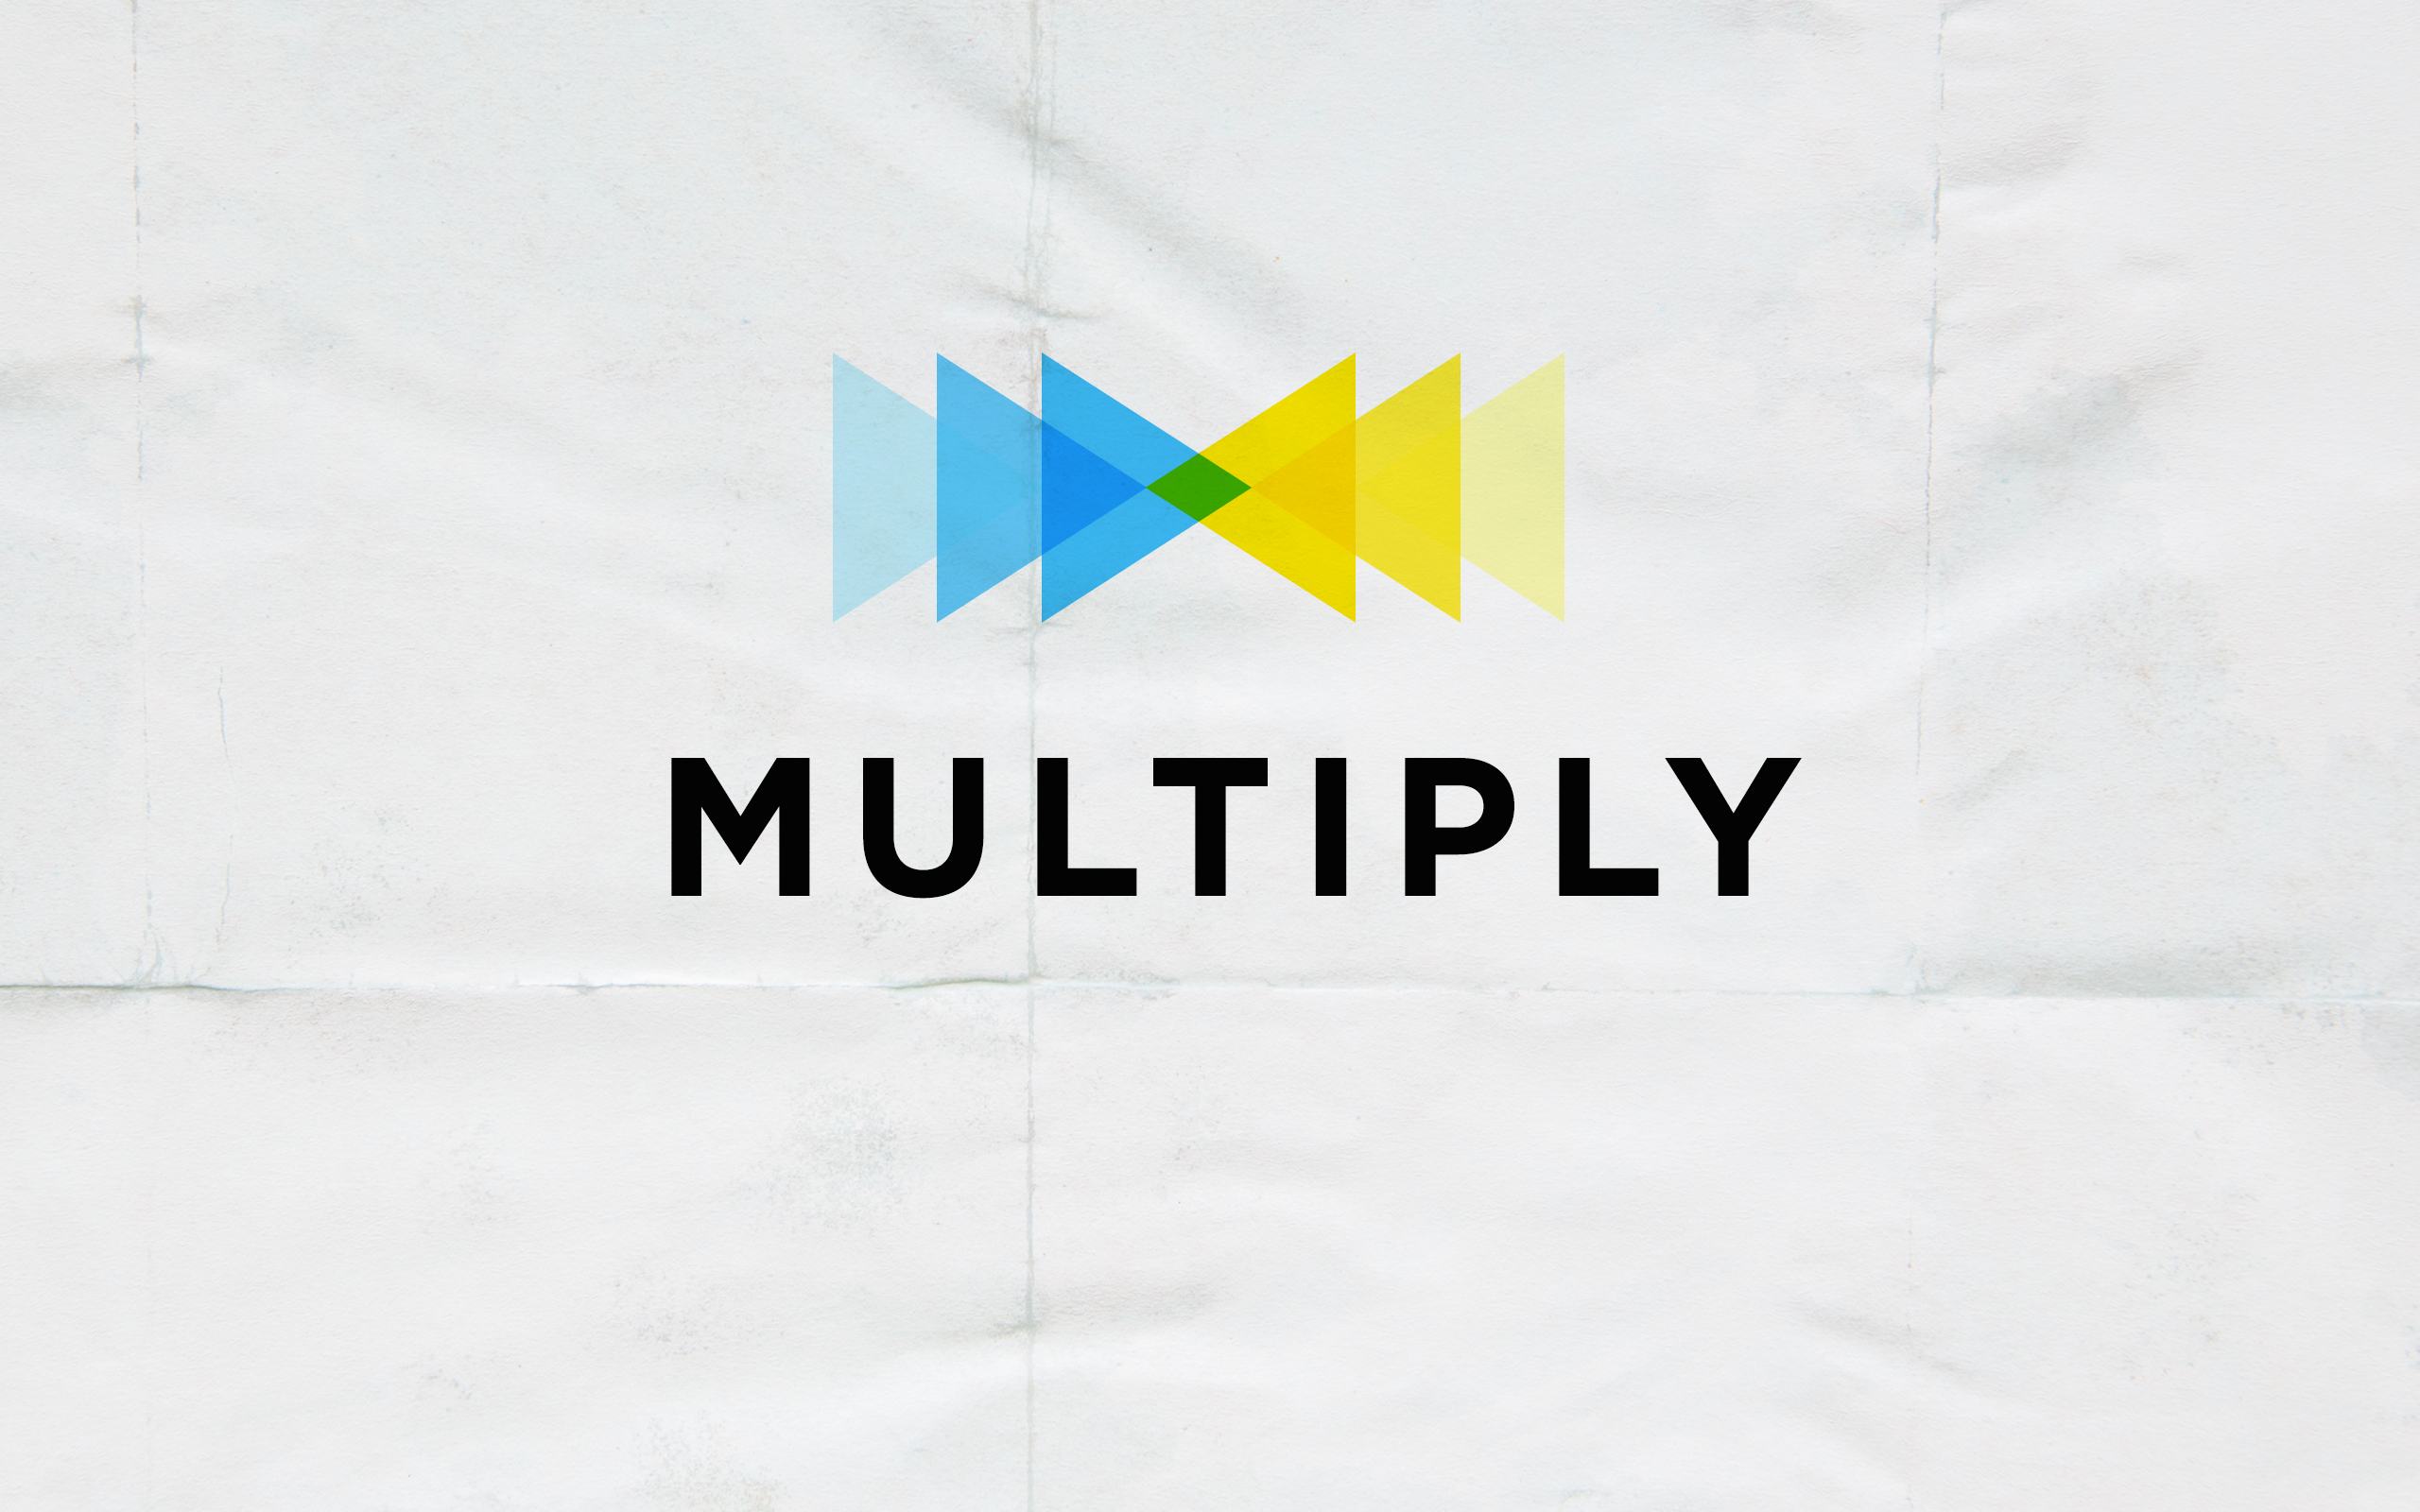 Multiply – Empowered by the Holy Spirit